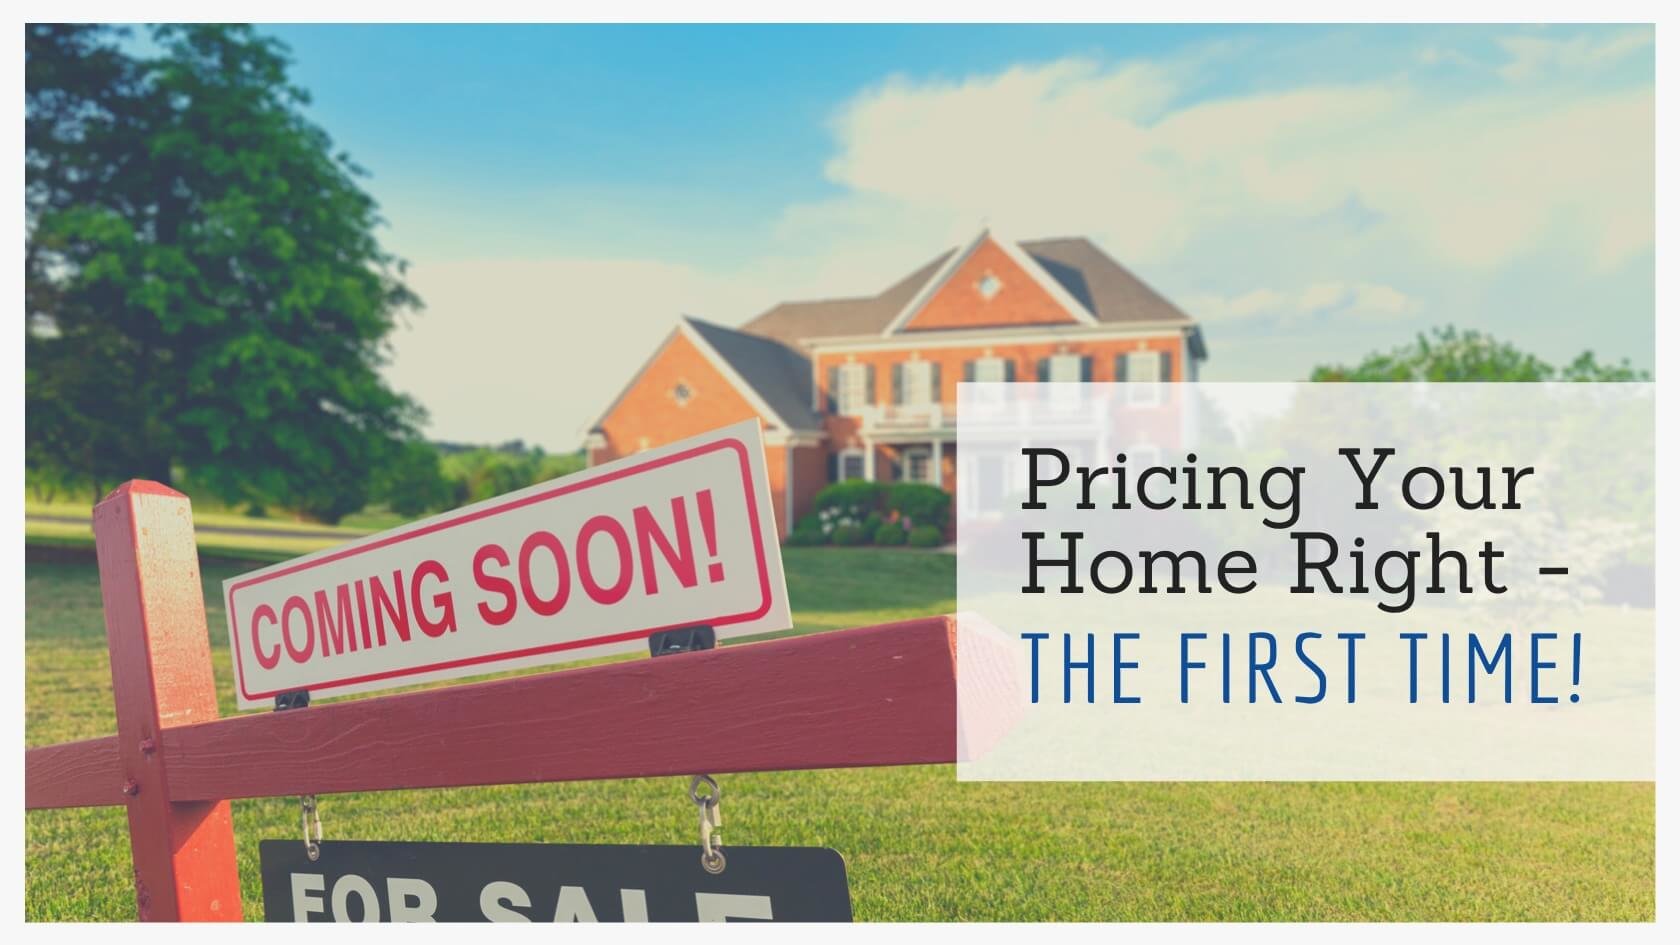 Pricing Your Home to Sell at the Right Price